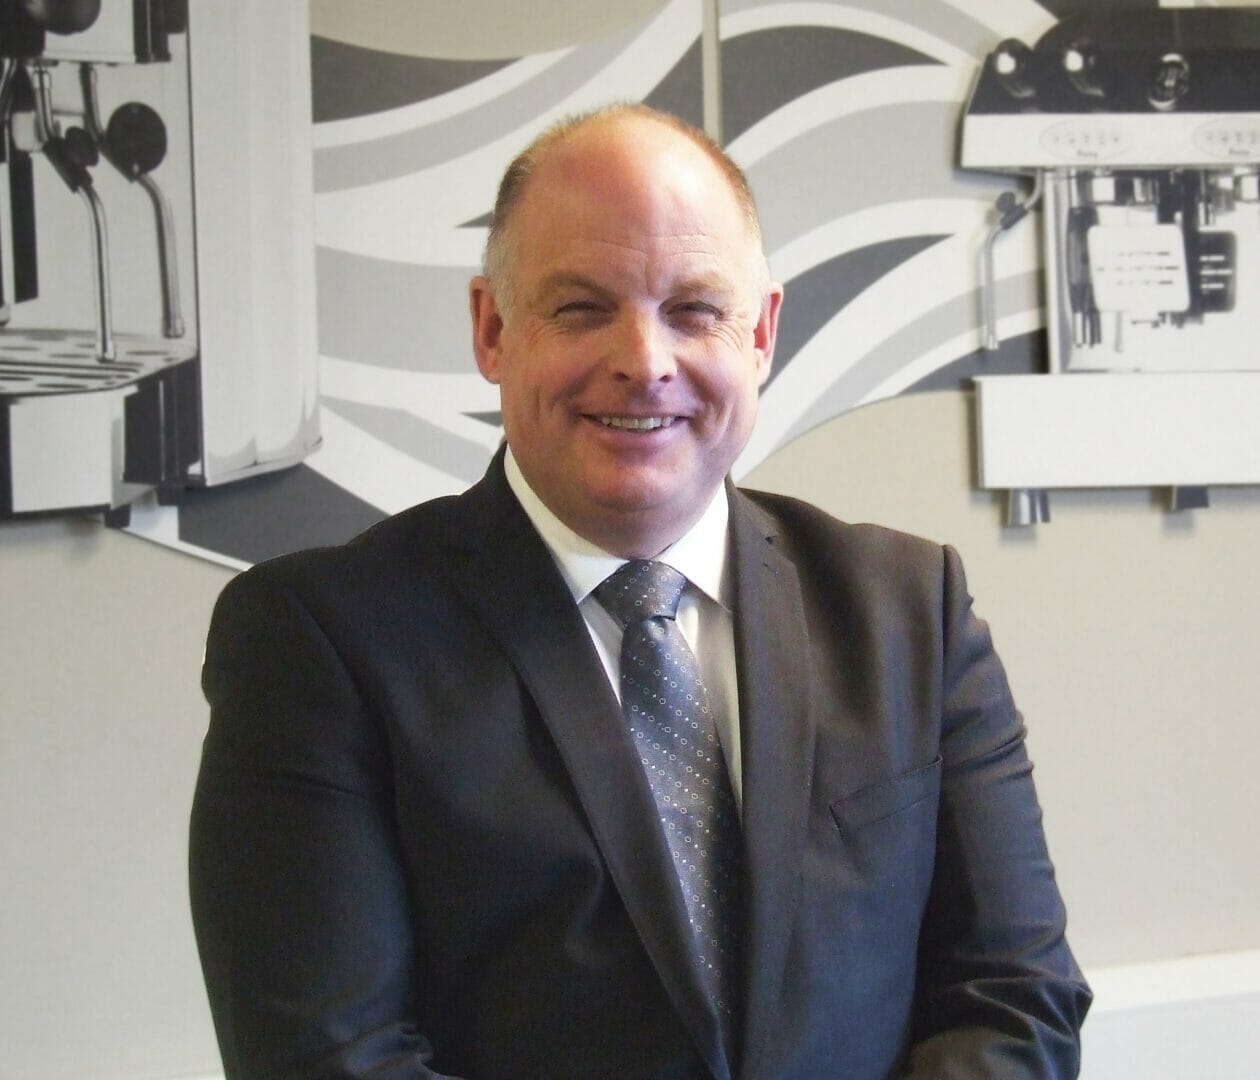 Coffee machine manufacturer’s sales chief appointed to Made in Britain board